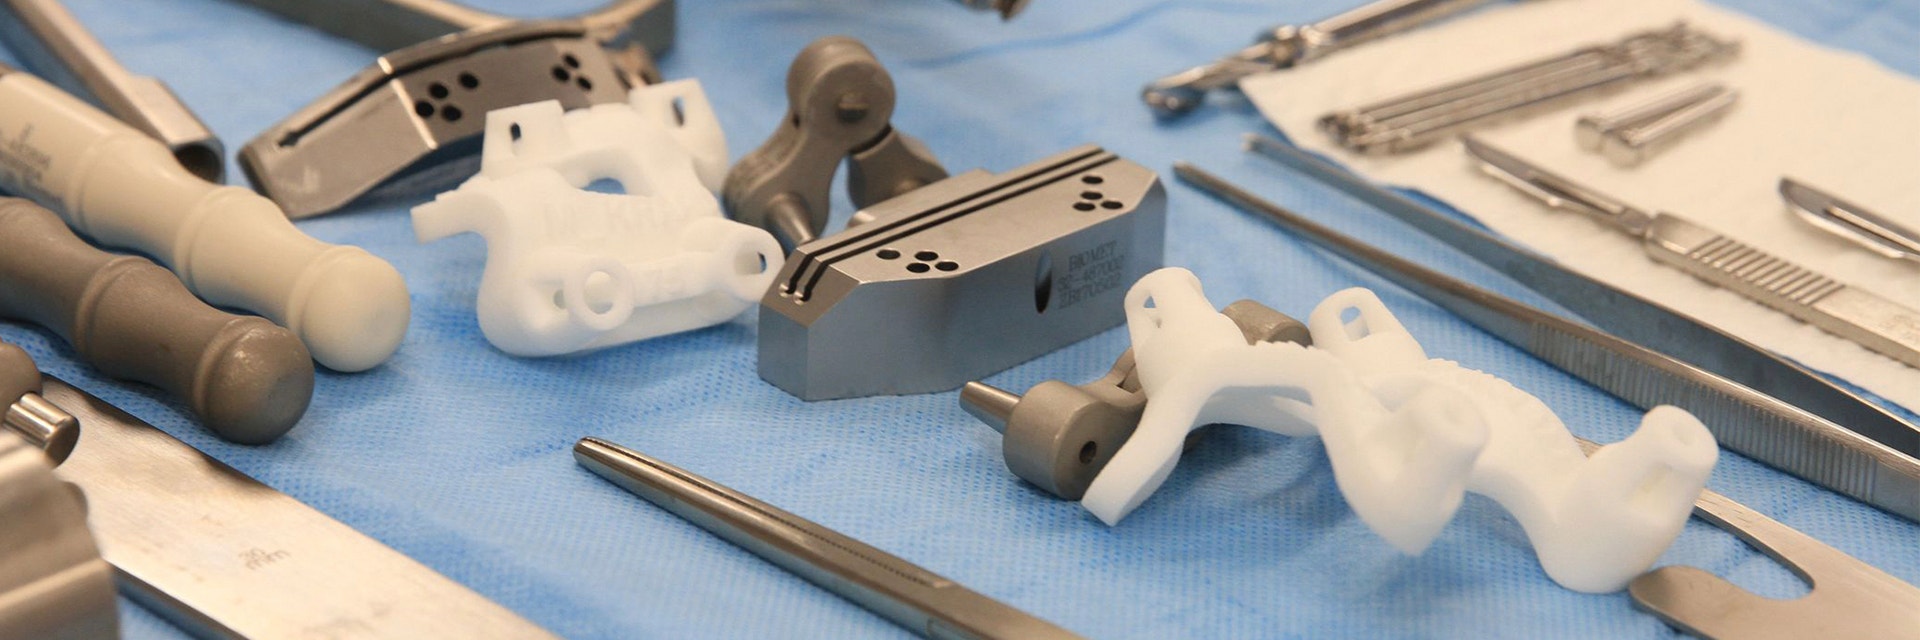 Surgical tools, including 3D-printed surgical guides, on a lined plate before a surgery